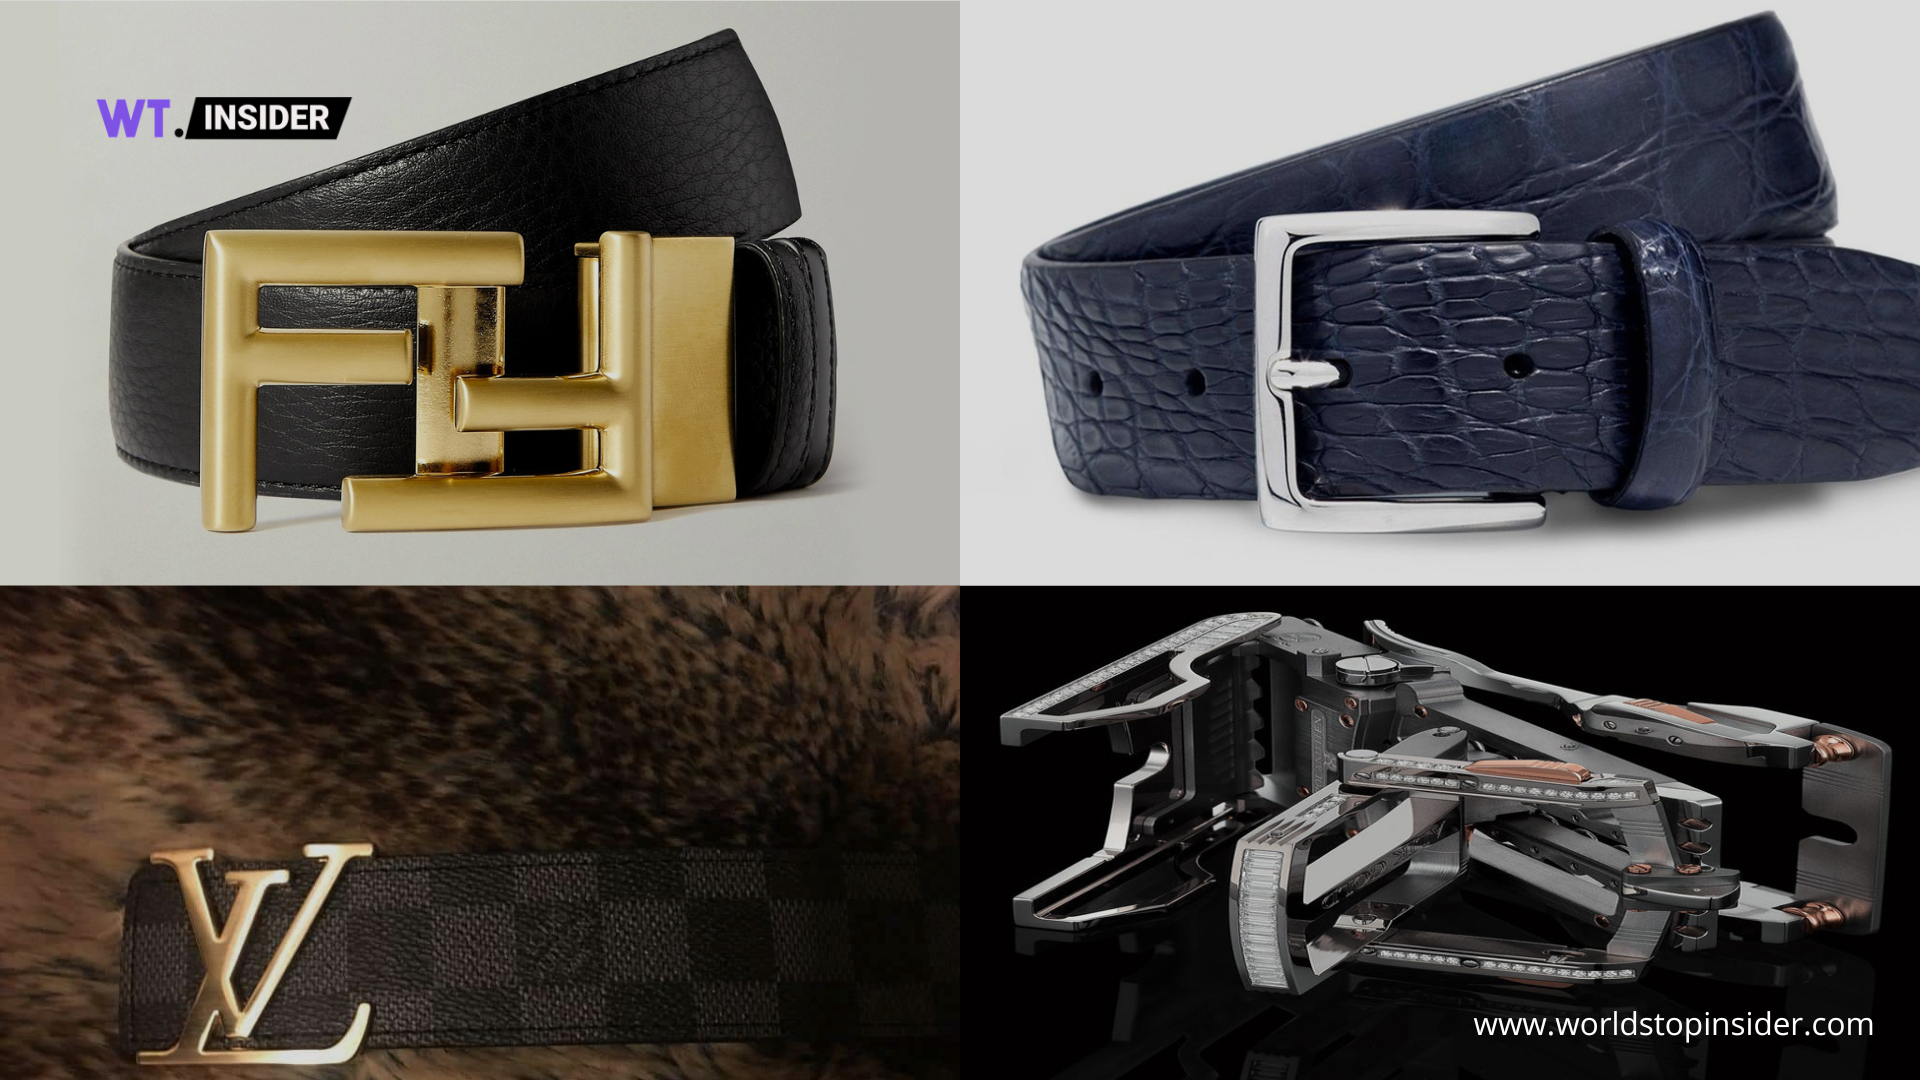 Top 10 Most Expensive Belts In The World - $3.6 Million Dollars